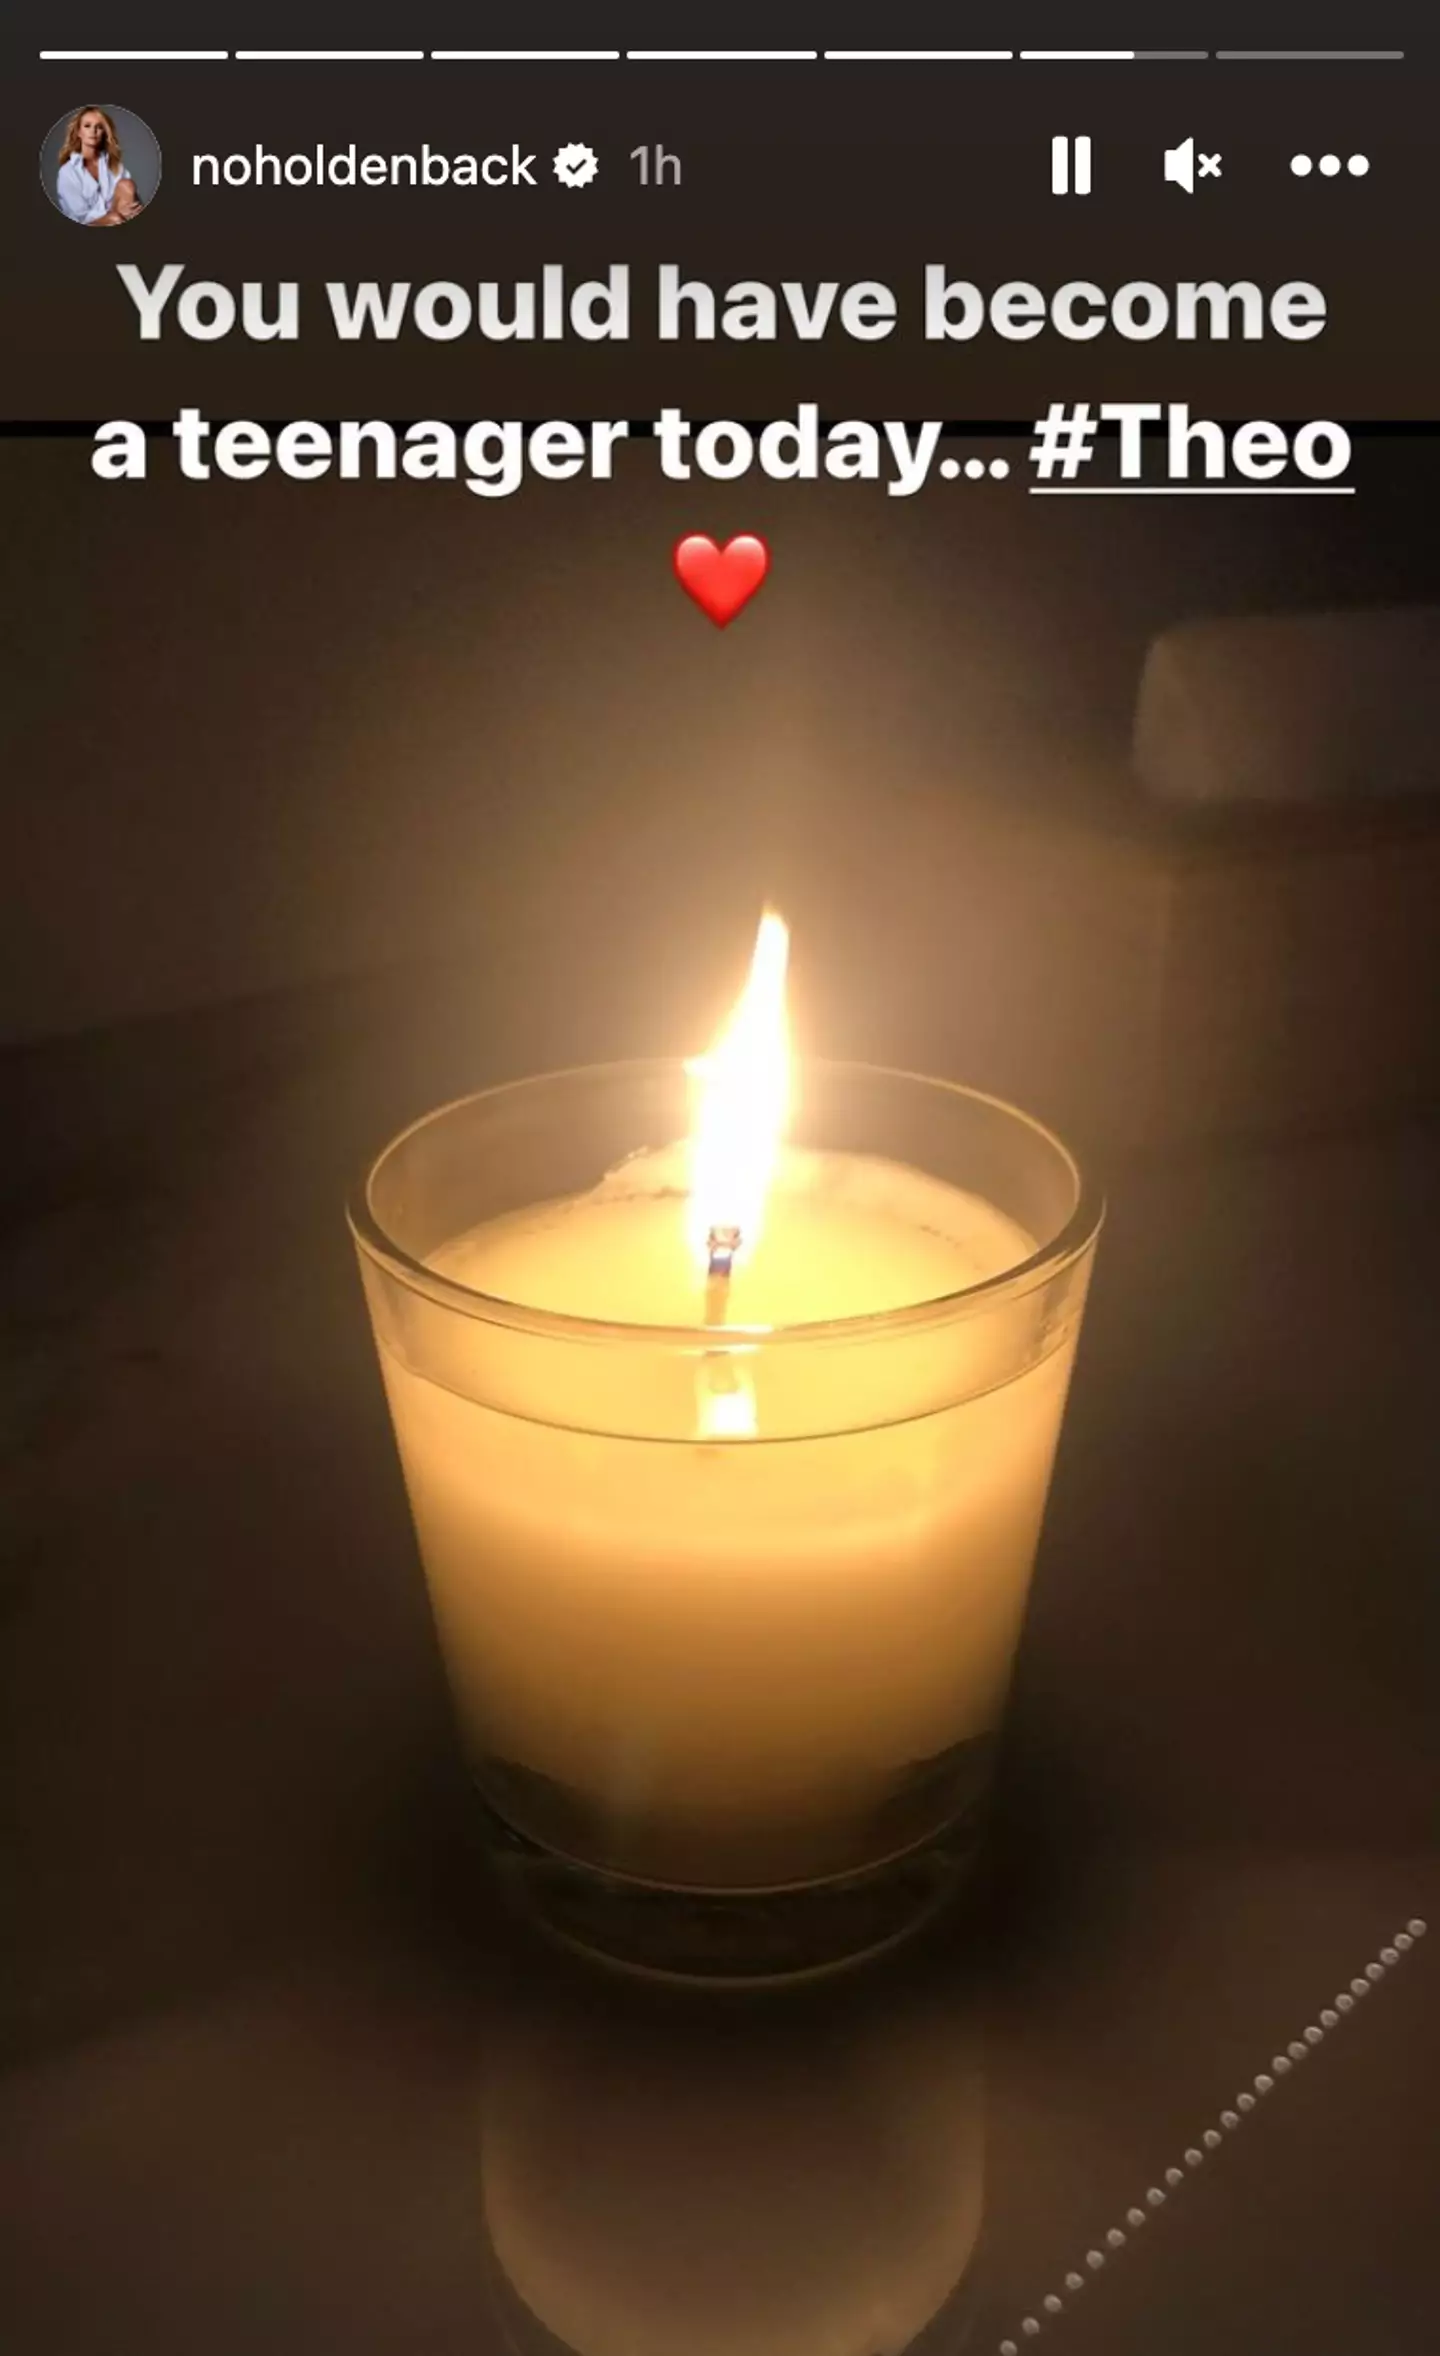 Amanda shared a sweet tribute to Theo on her Instagram Story today (1 February).